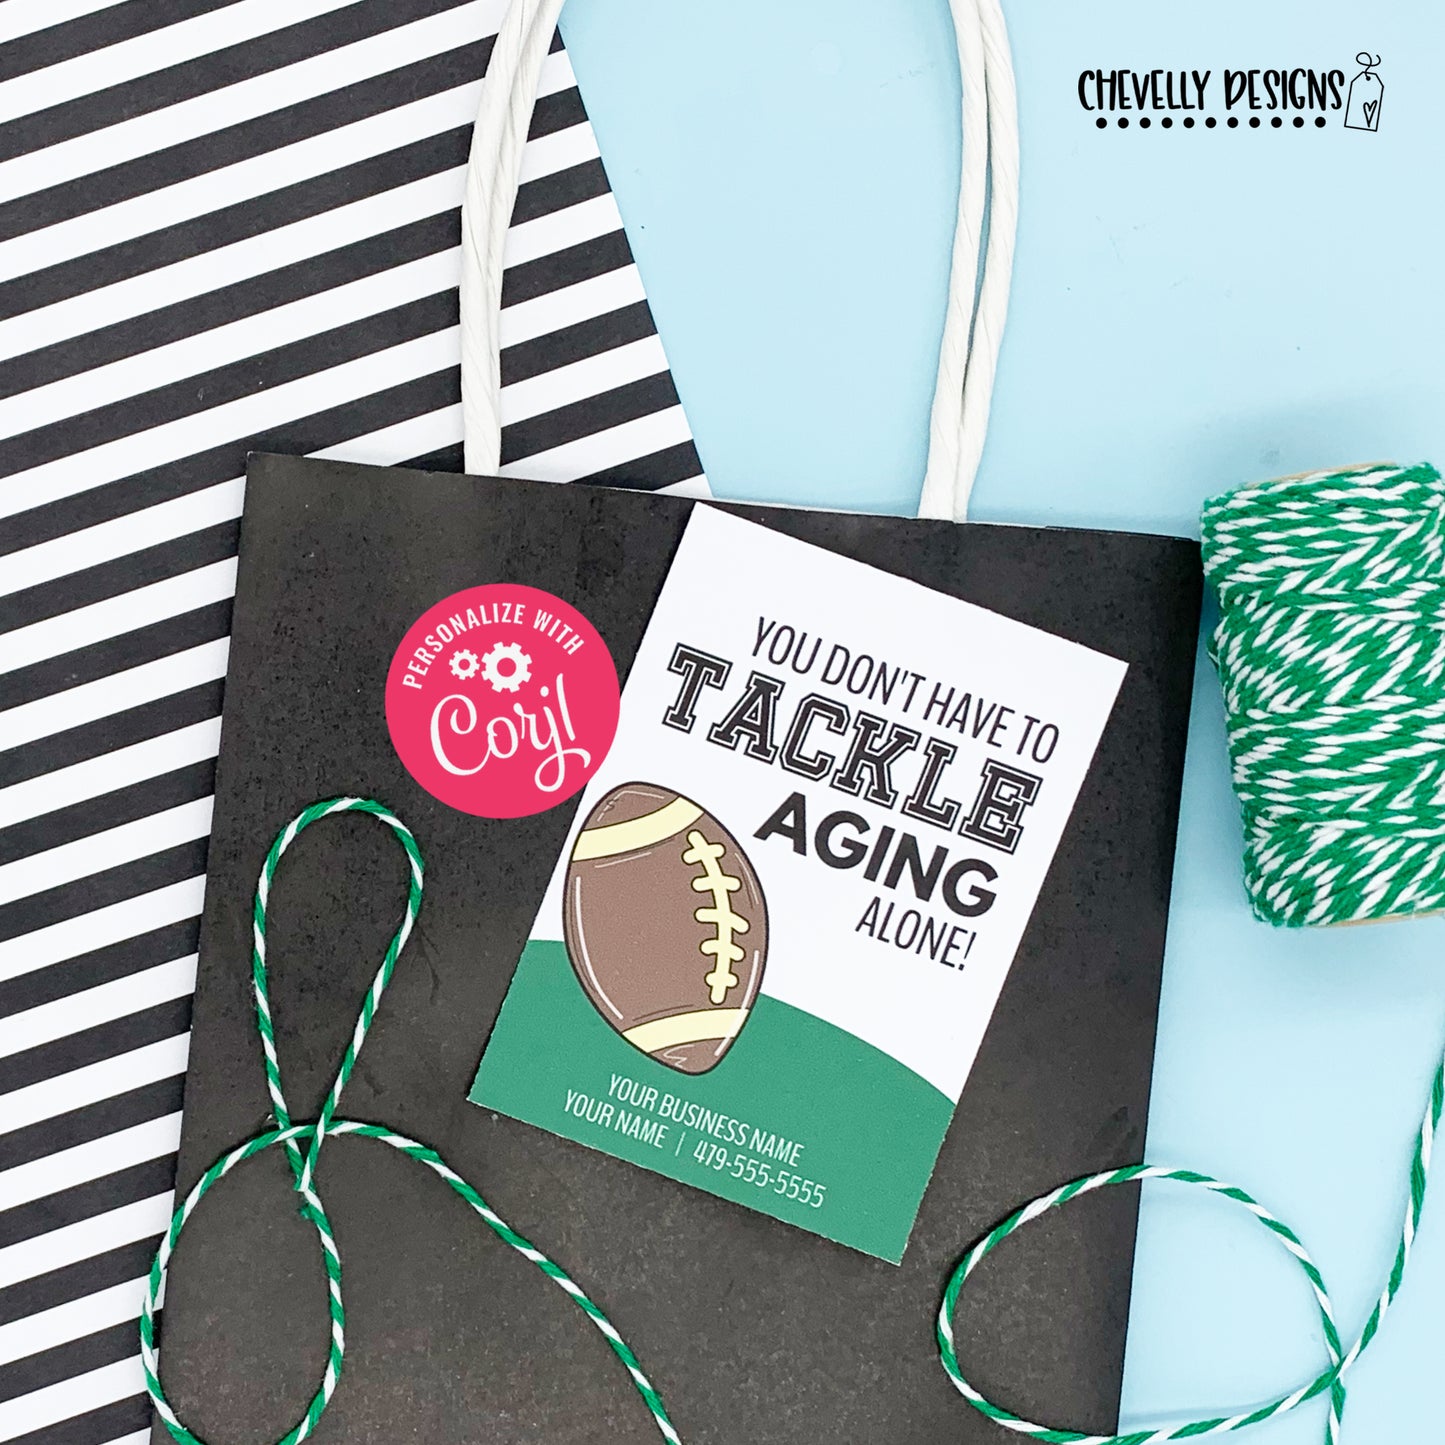 EDITABLE - You Don't Have To Tackle Aging Alone - Printable Football Referral Gift Tags - Digital File